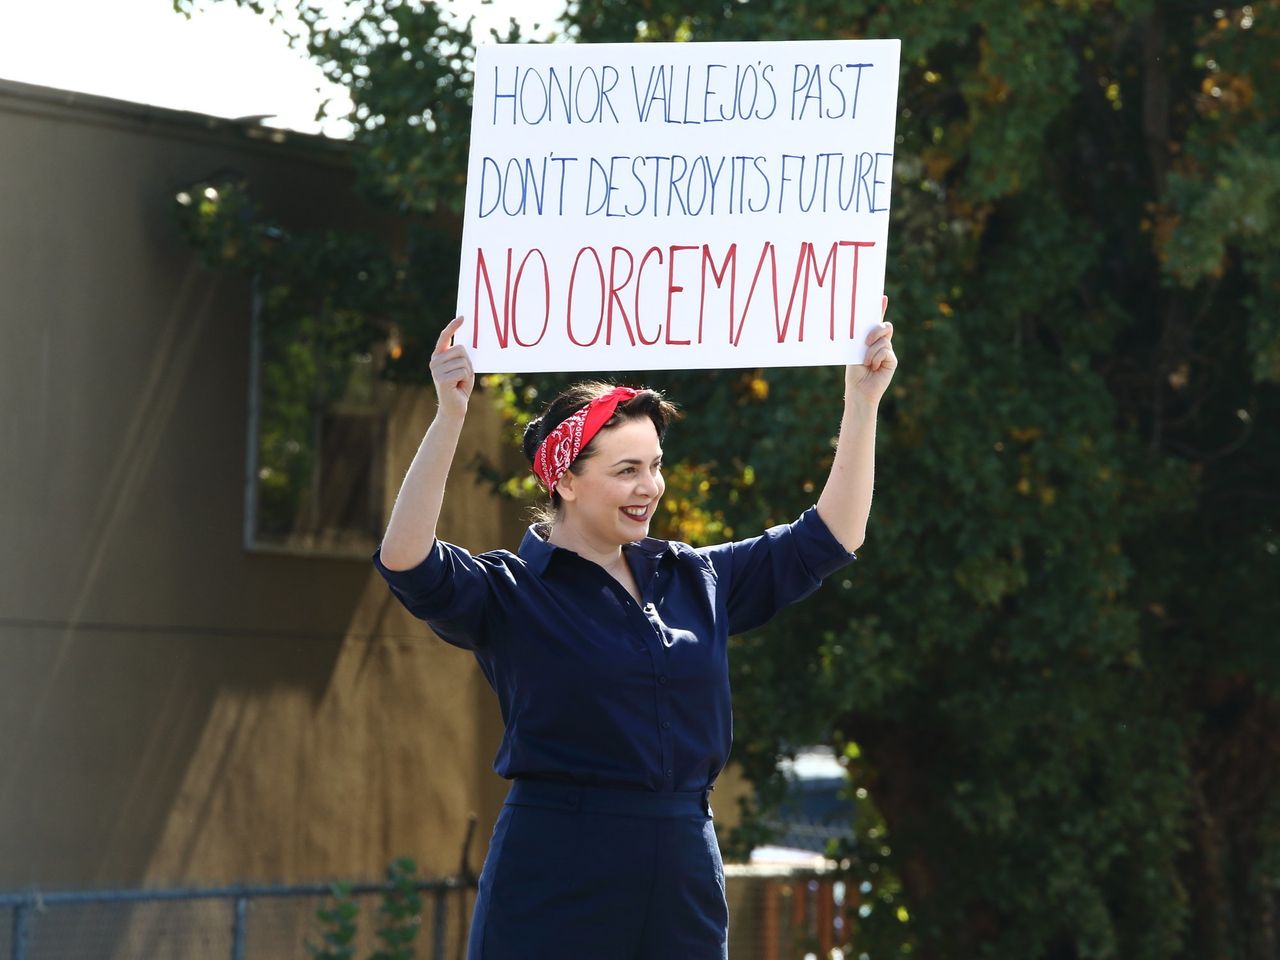 A protester holds up a banner at a rally in Vallejo, California, in October to oppose the proposed Orcem cement factory